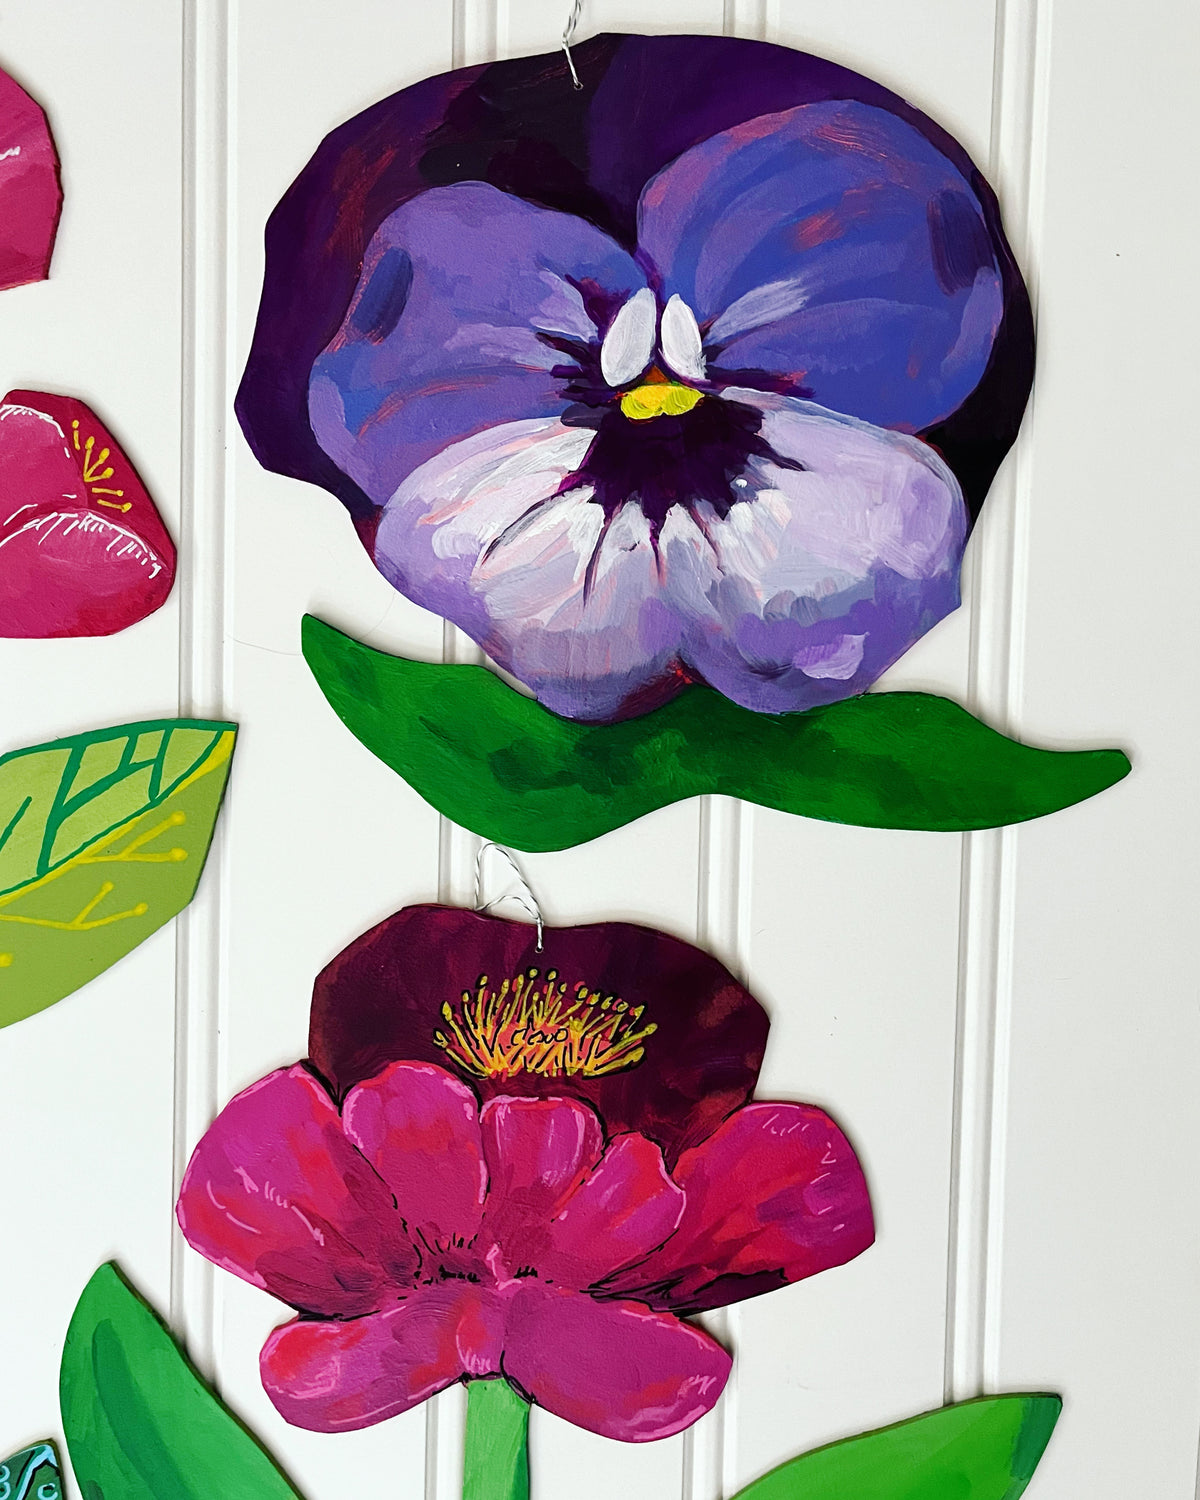 cutout wooden flower painting, by artist Abigail Gray Swartz. Purple pansy flower in group, acrylic on panel.